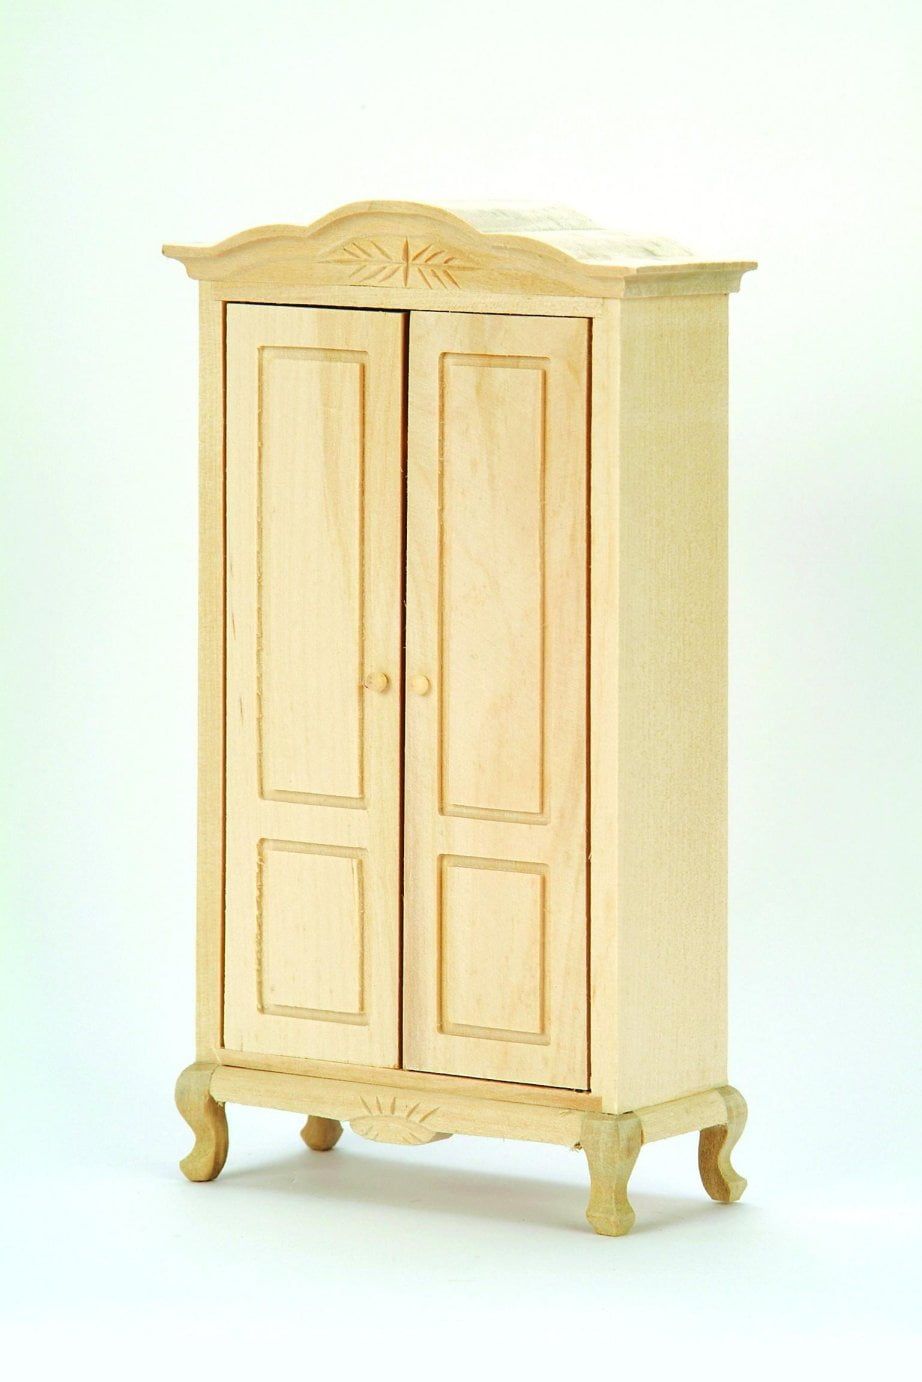 Bare Wood Fancy Wardrobe for 12th Scale Dolls House